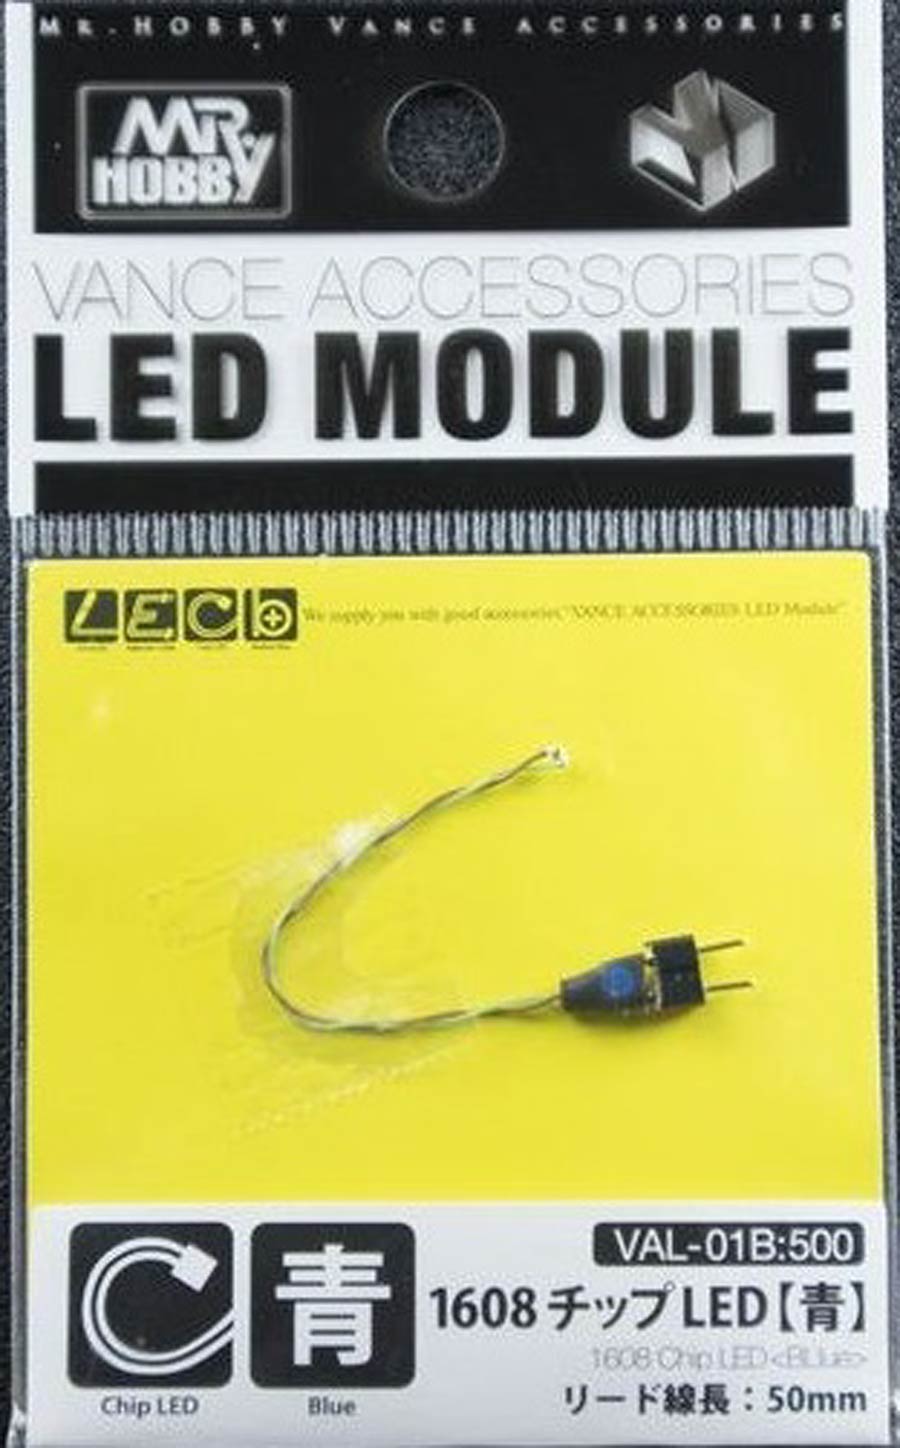 Mr. Hobby Vance Accessories LED Module -  Bag Of 10 Units - 1608 Chip LED (Blue)